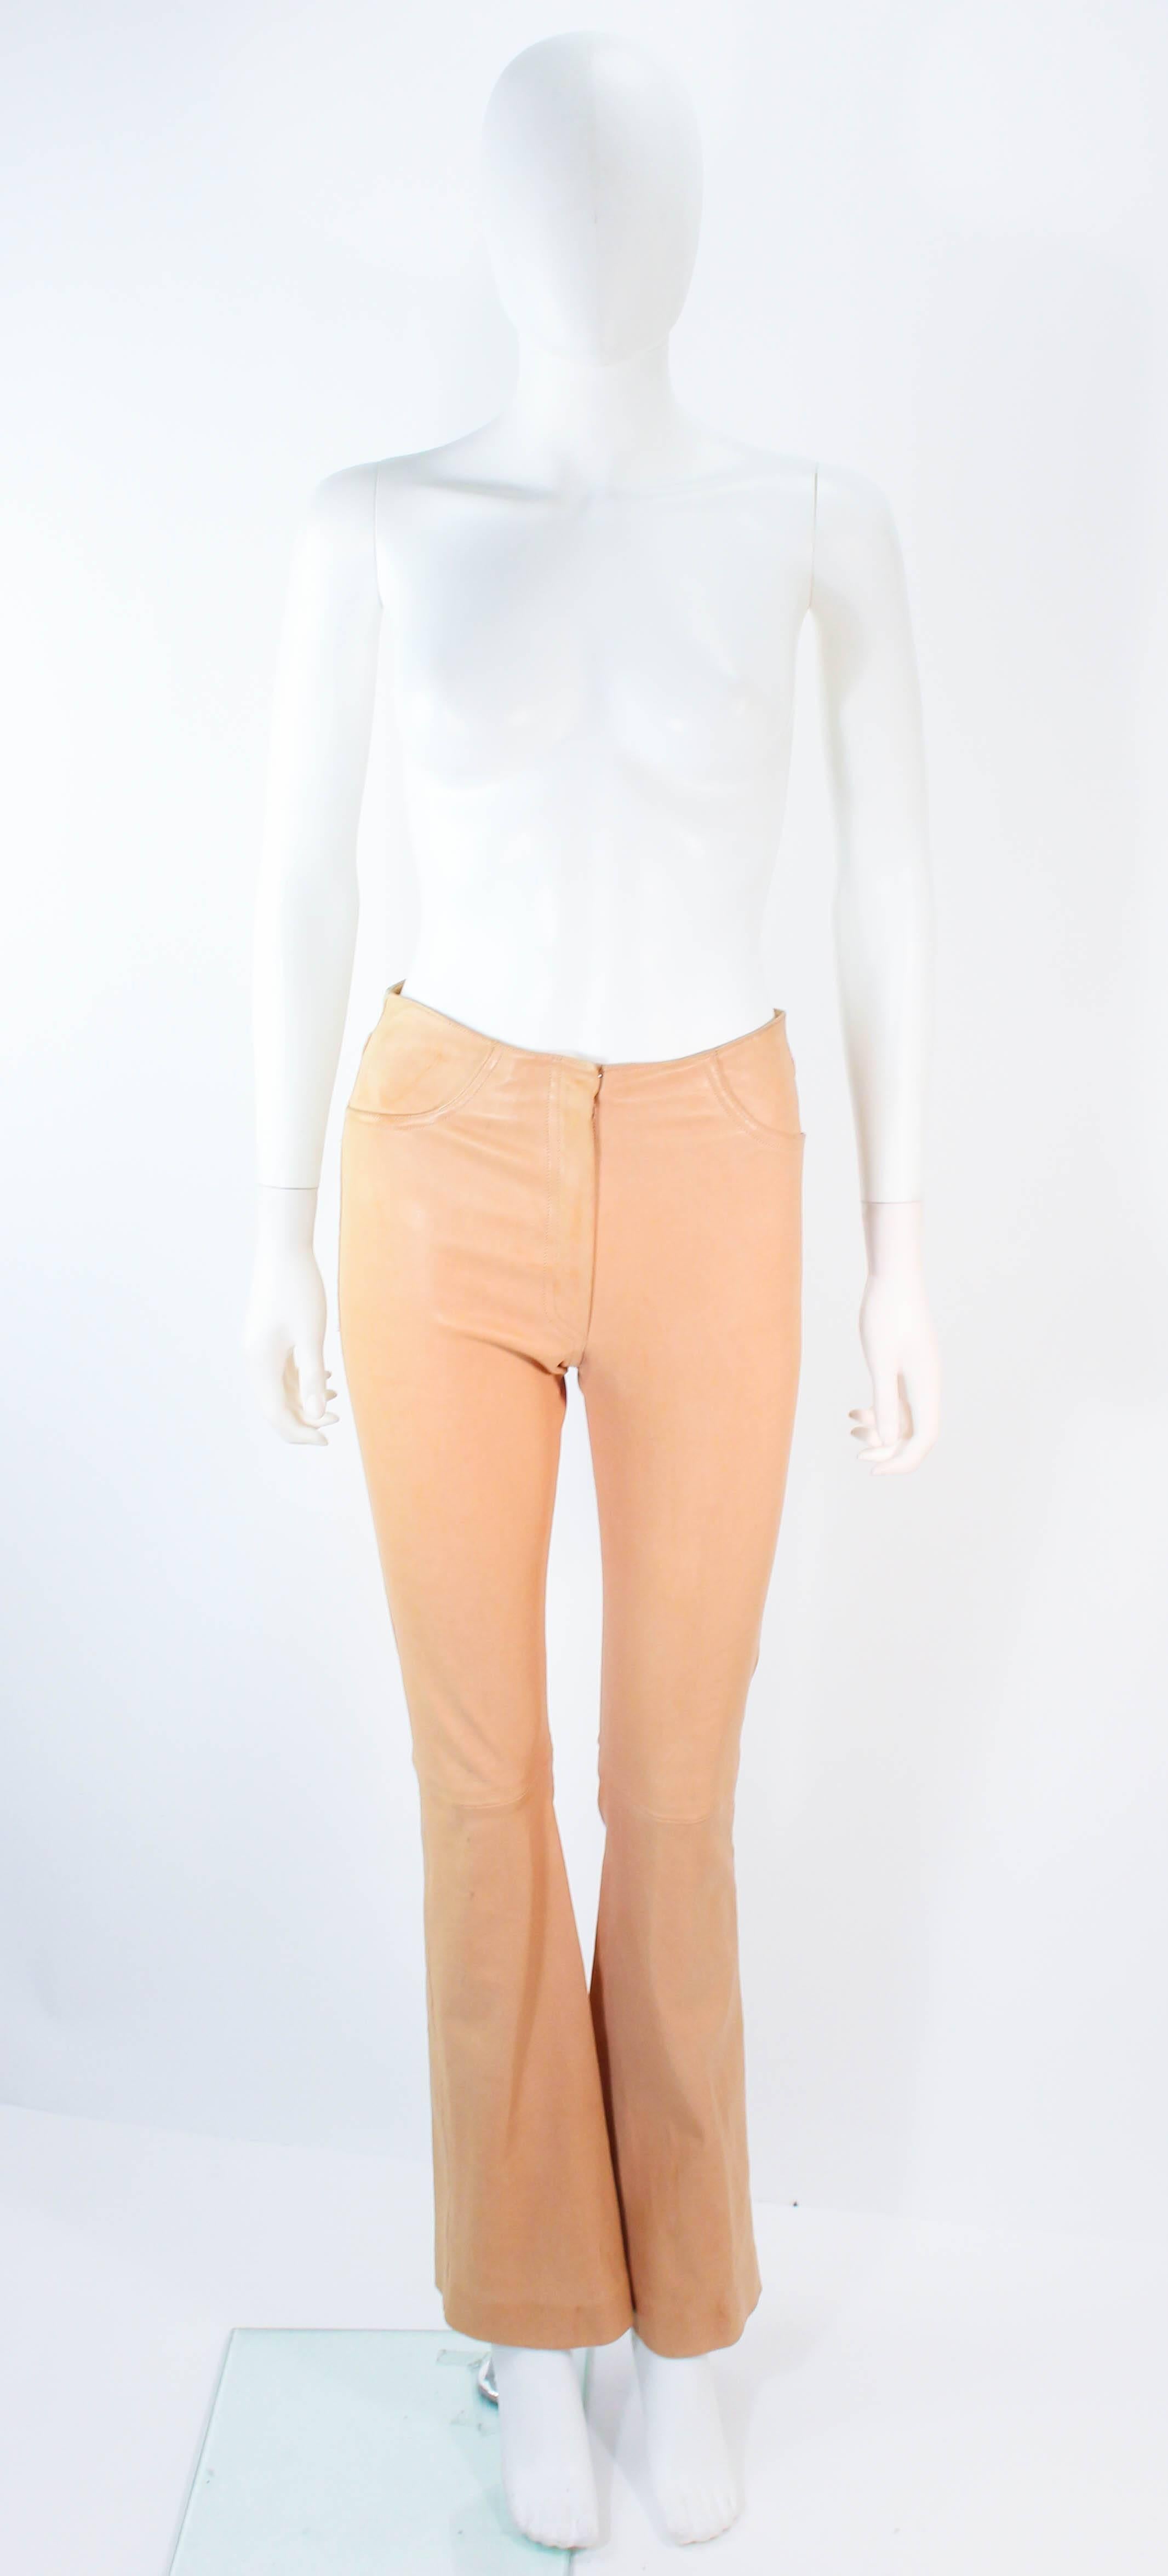 These Jean Claude Jitrois pants are composed of a beautiful stretch leather in a light natural beige hue. Features a boot cut style with a center front zipper. In excellent condition, minimal signs of wear due to the nature of the leather.